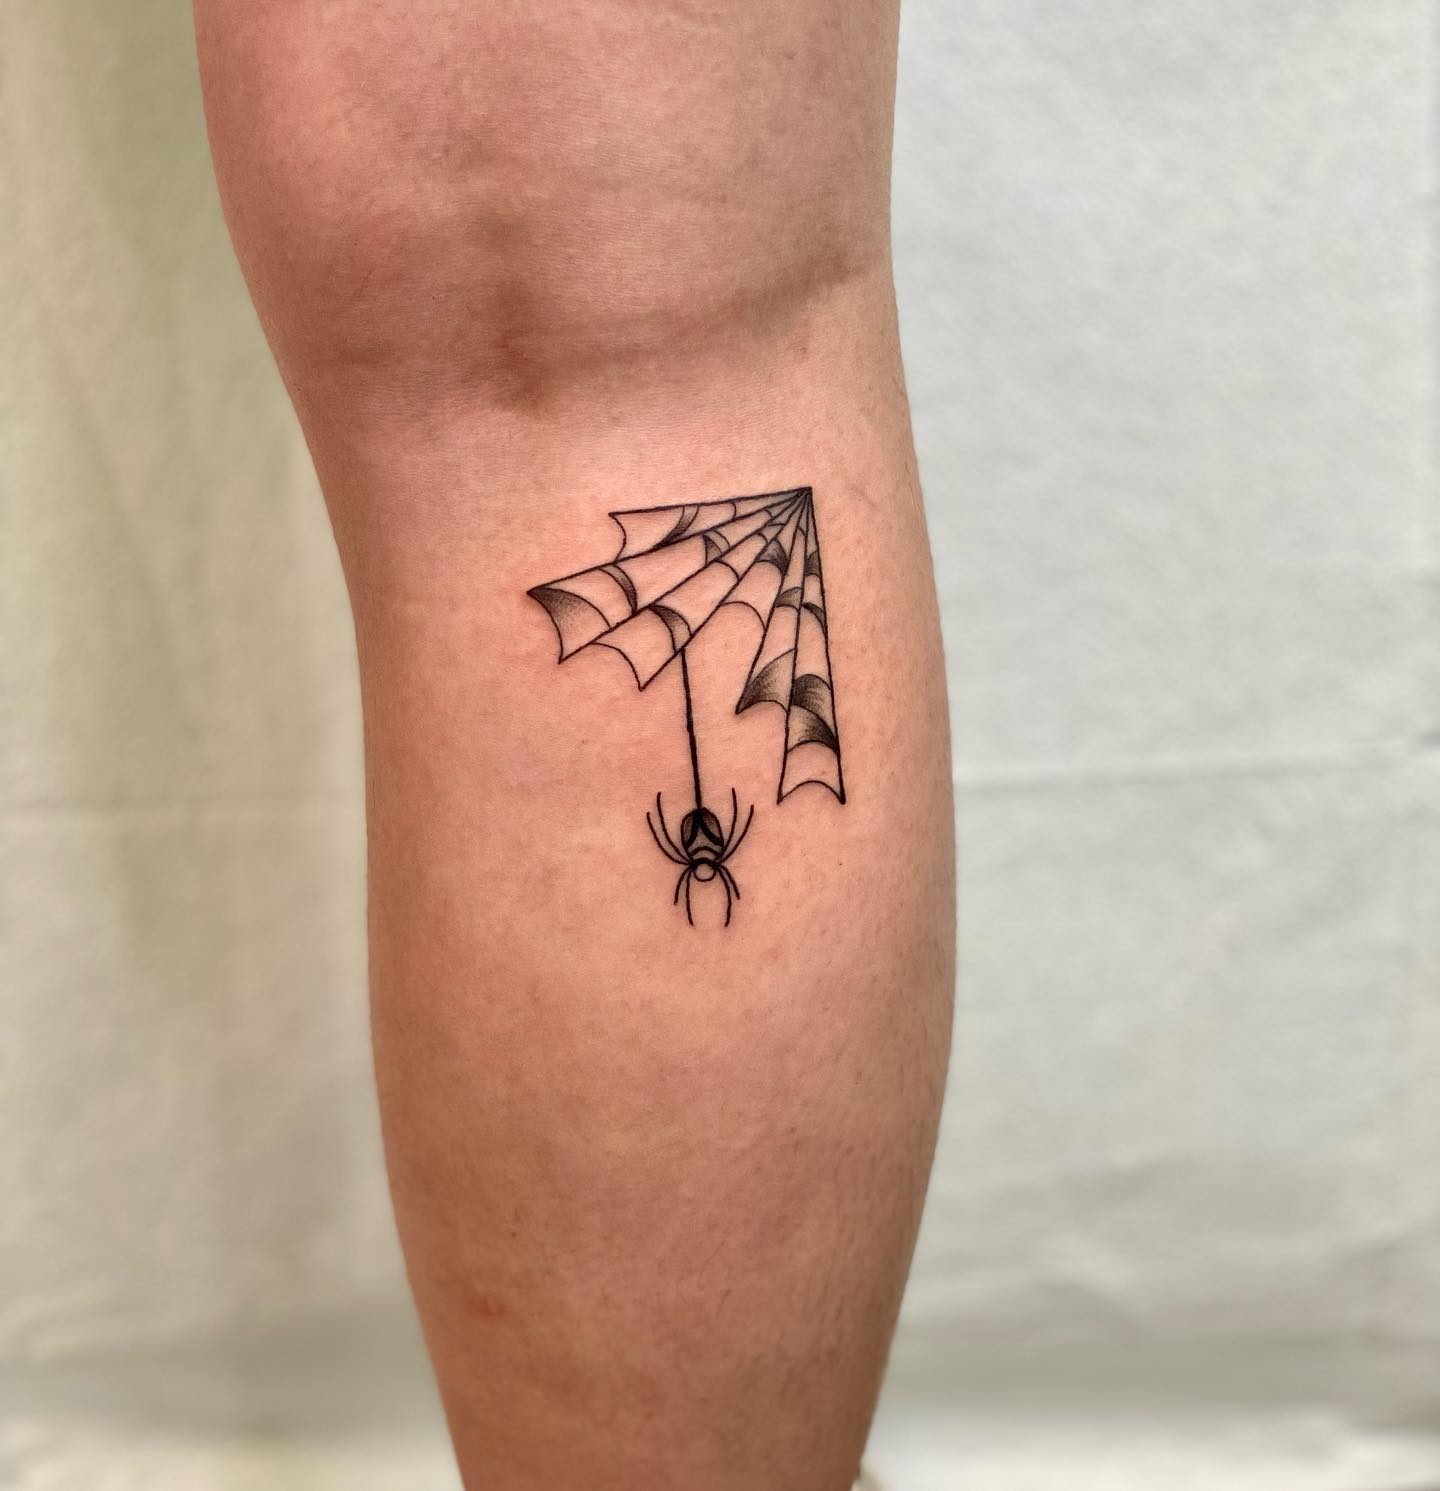 Show that sometimes hanging by a thread and staying stuck in a given situation doesn’t have to be too bad. If you’re an optimist, this tattoo will suit you.